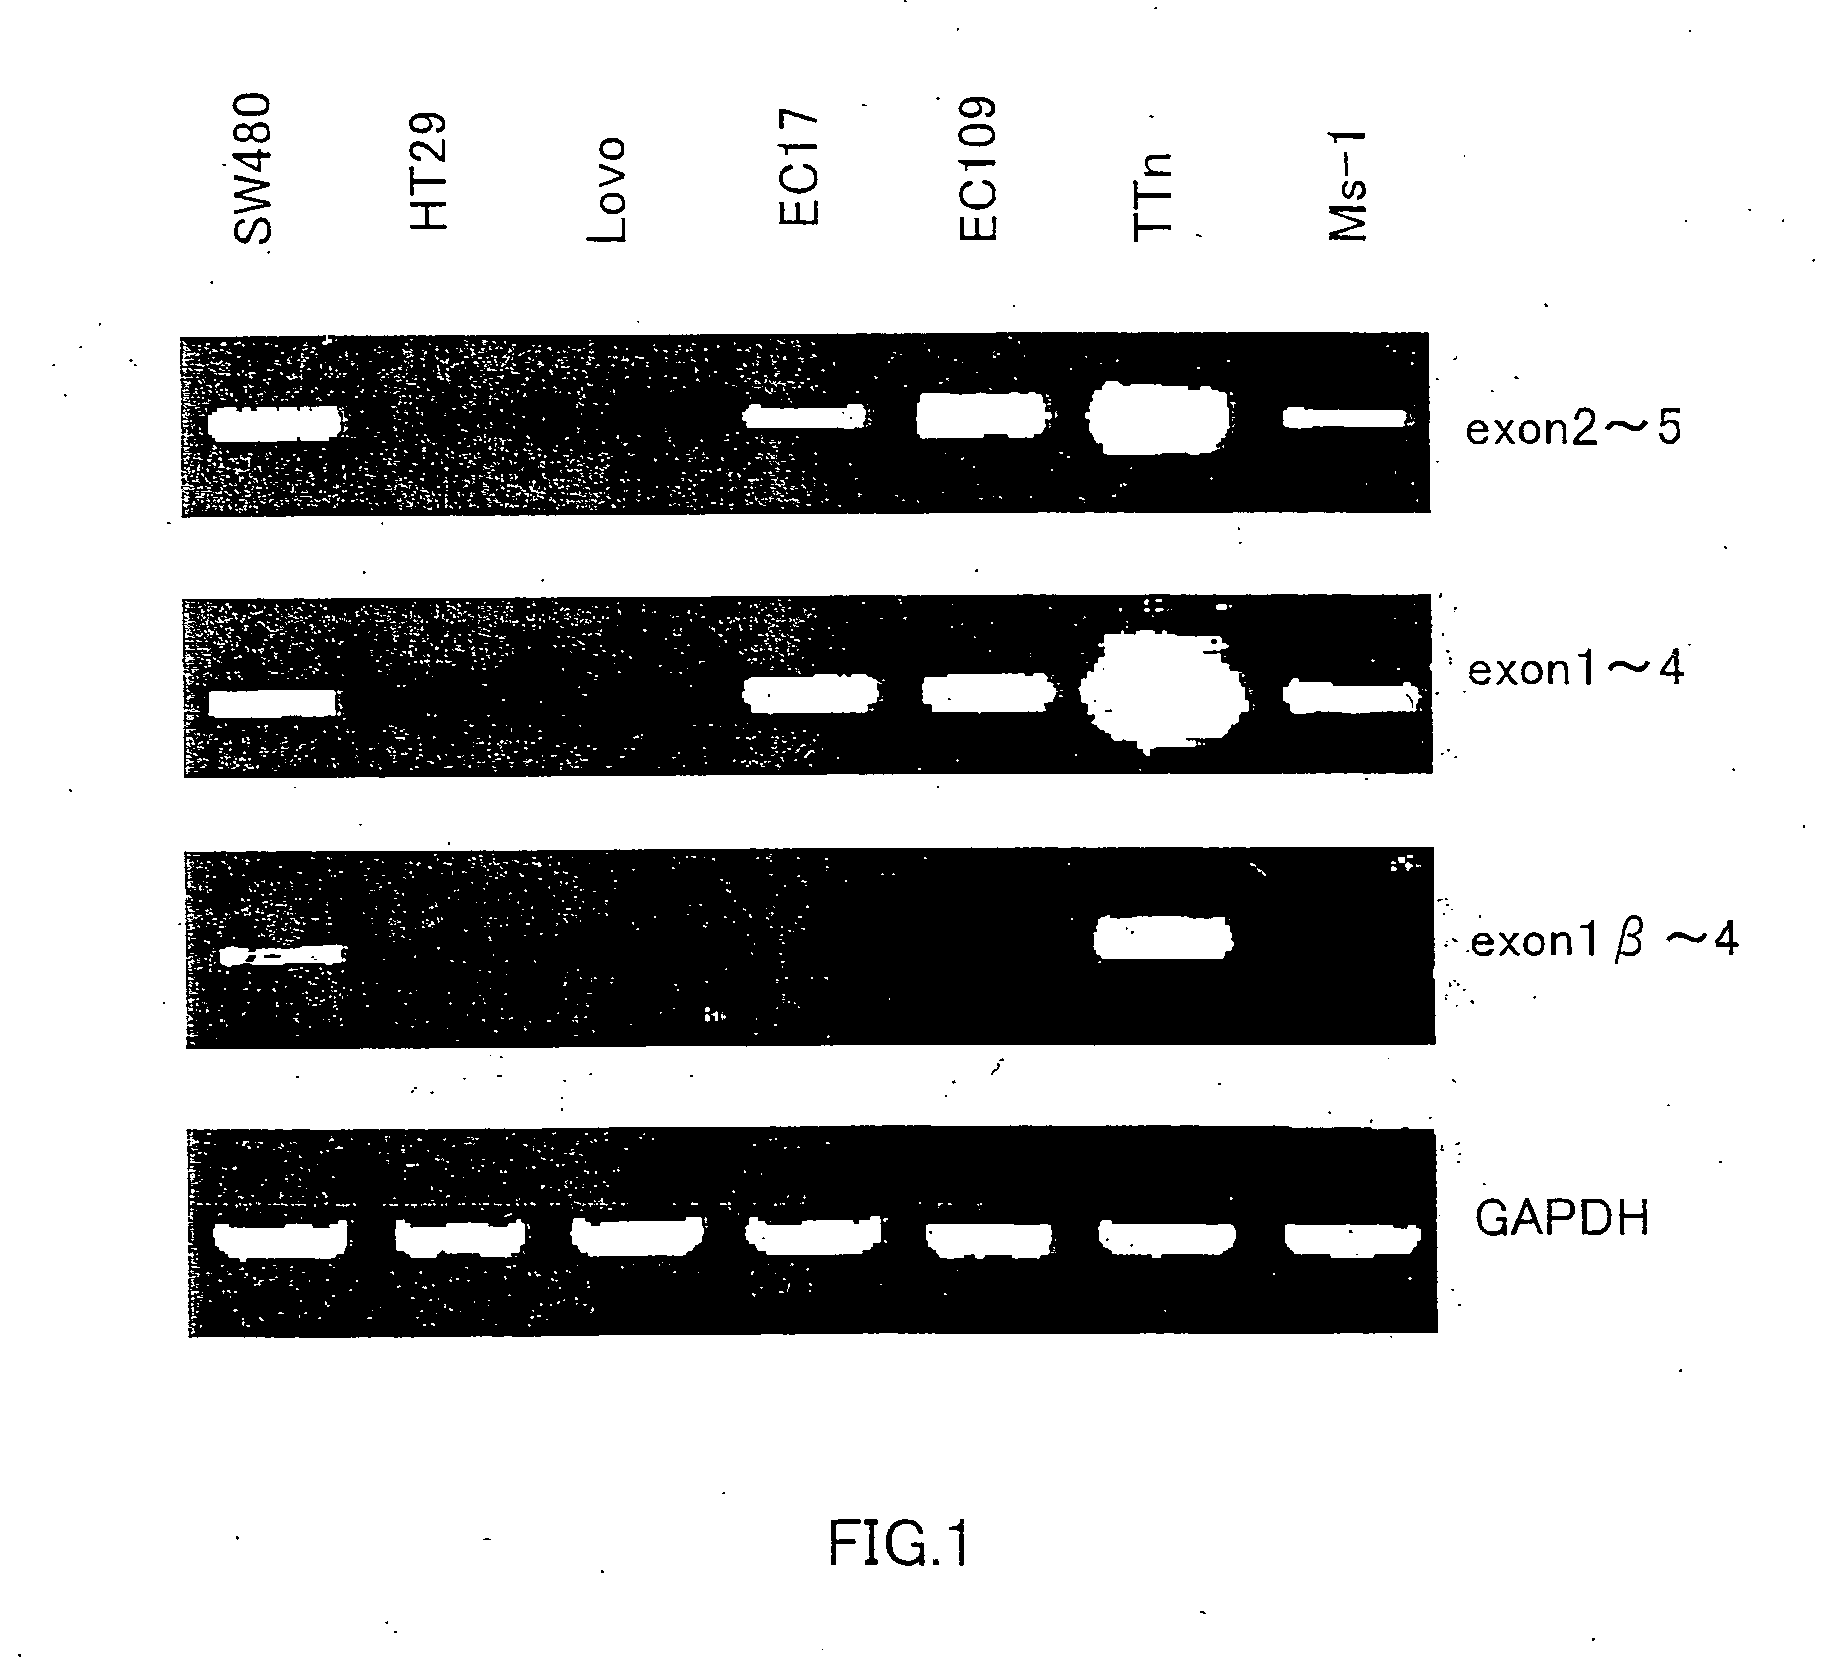 Exon 1 ss of pdgf alpha gene and utilization thereof